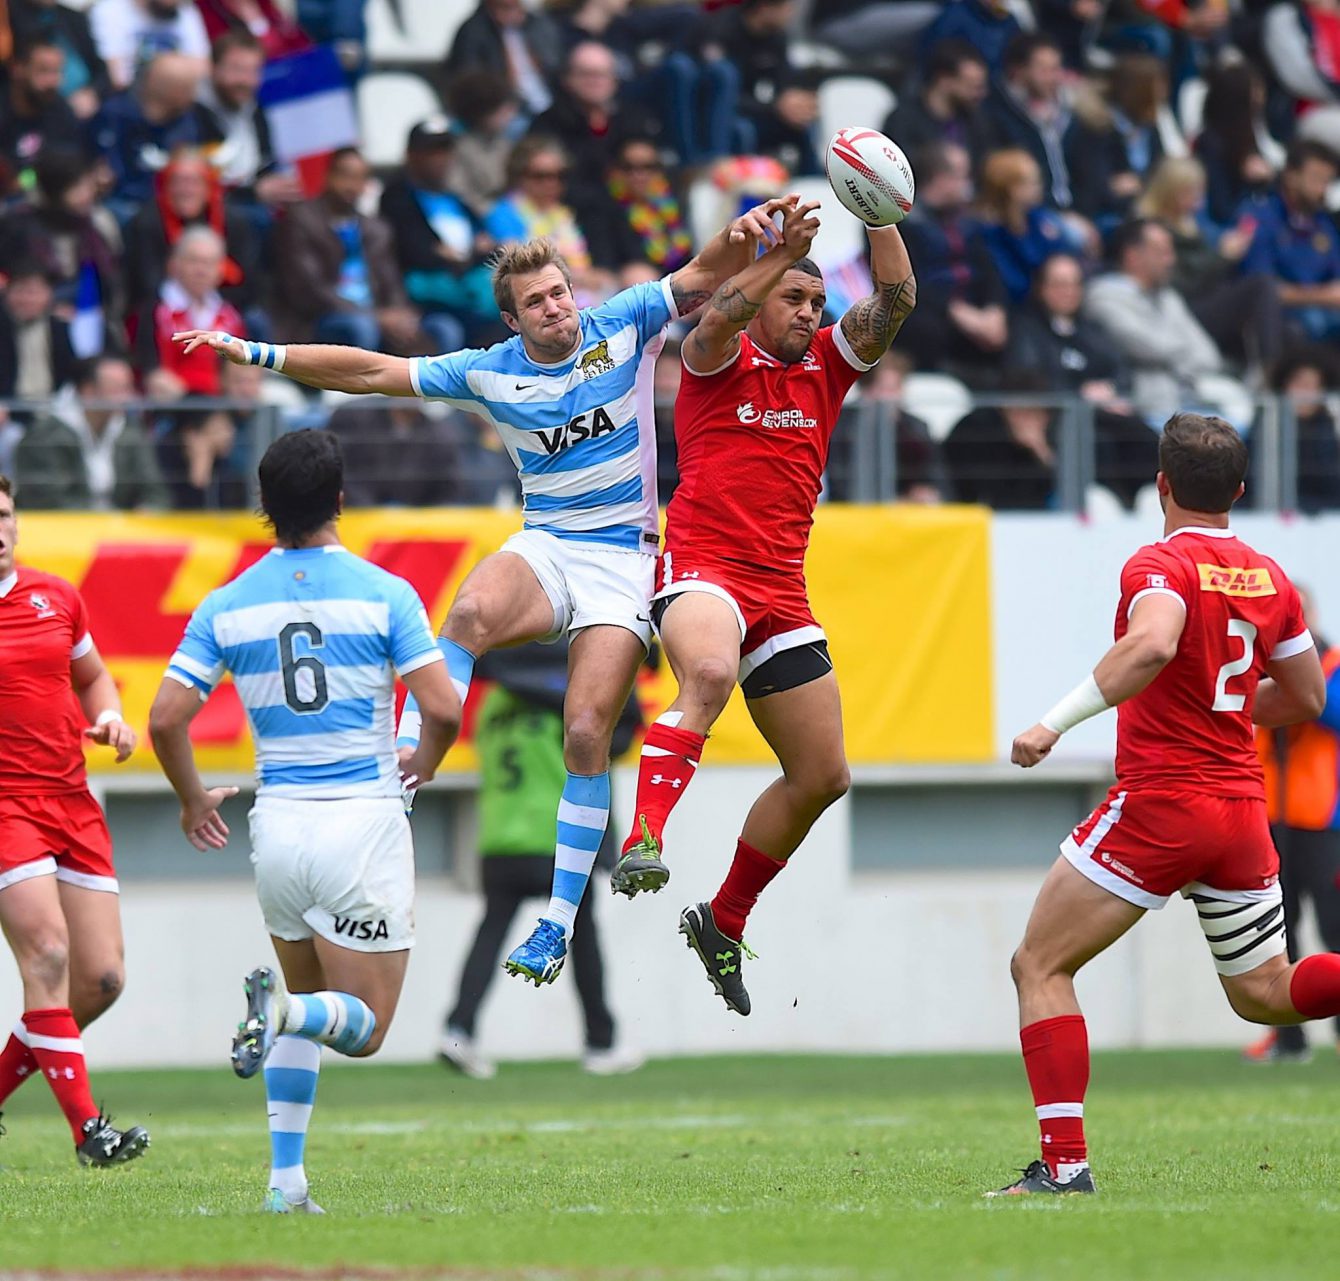 Mike Fuailefau gains possession for Canada in a match against Argentina at Paris Sevens 2016 (Photo: Rugby Canada).